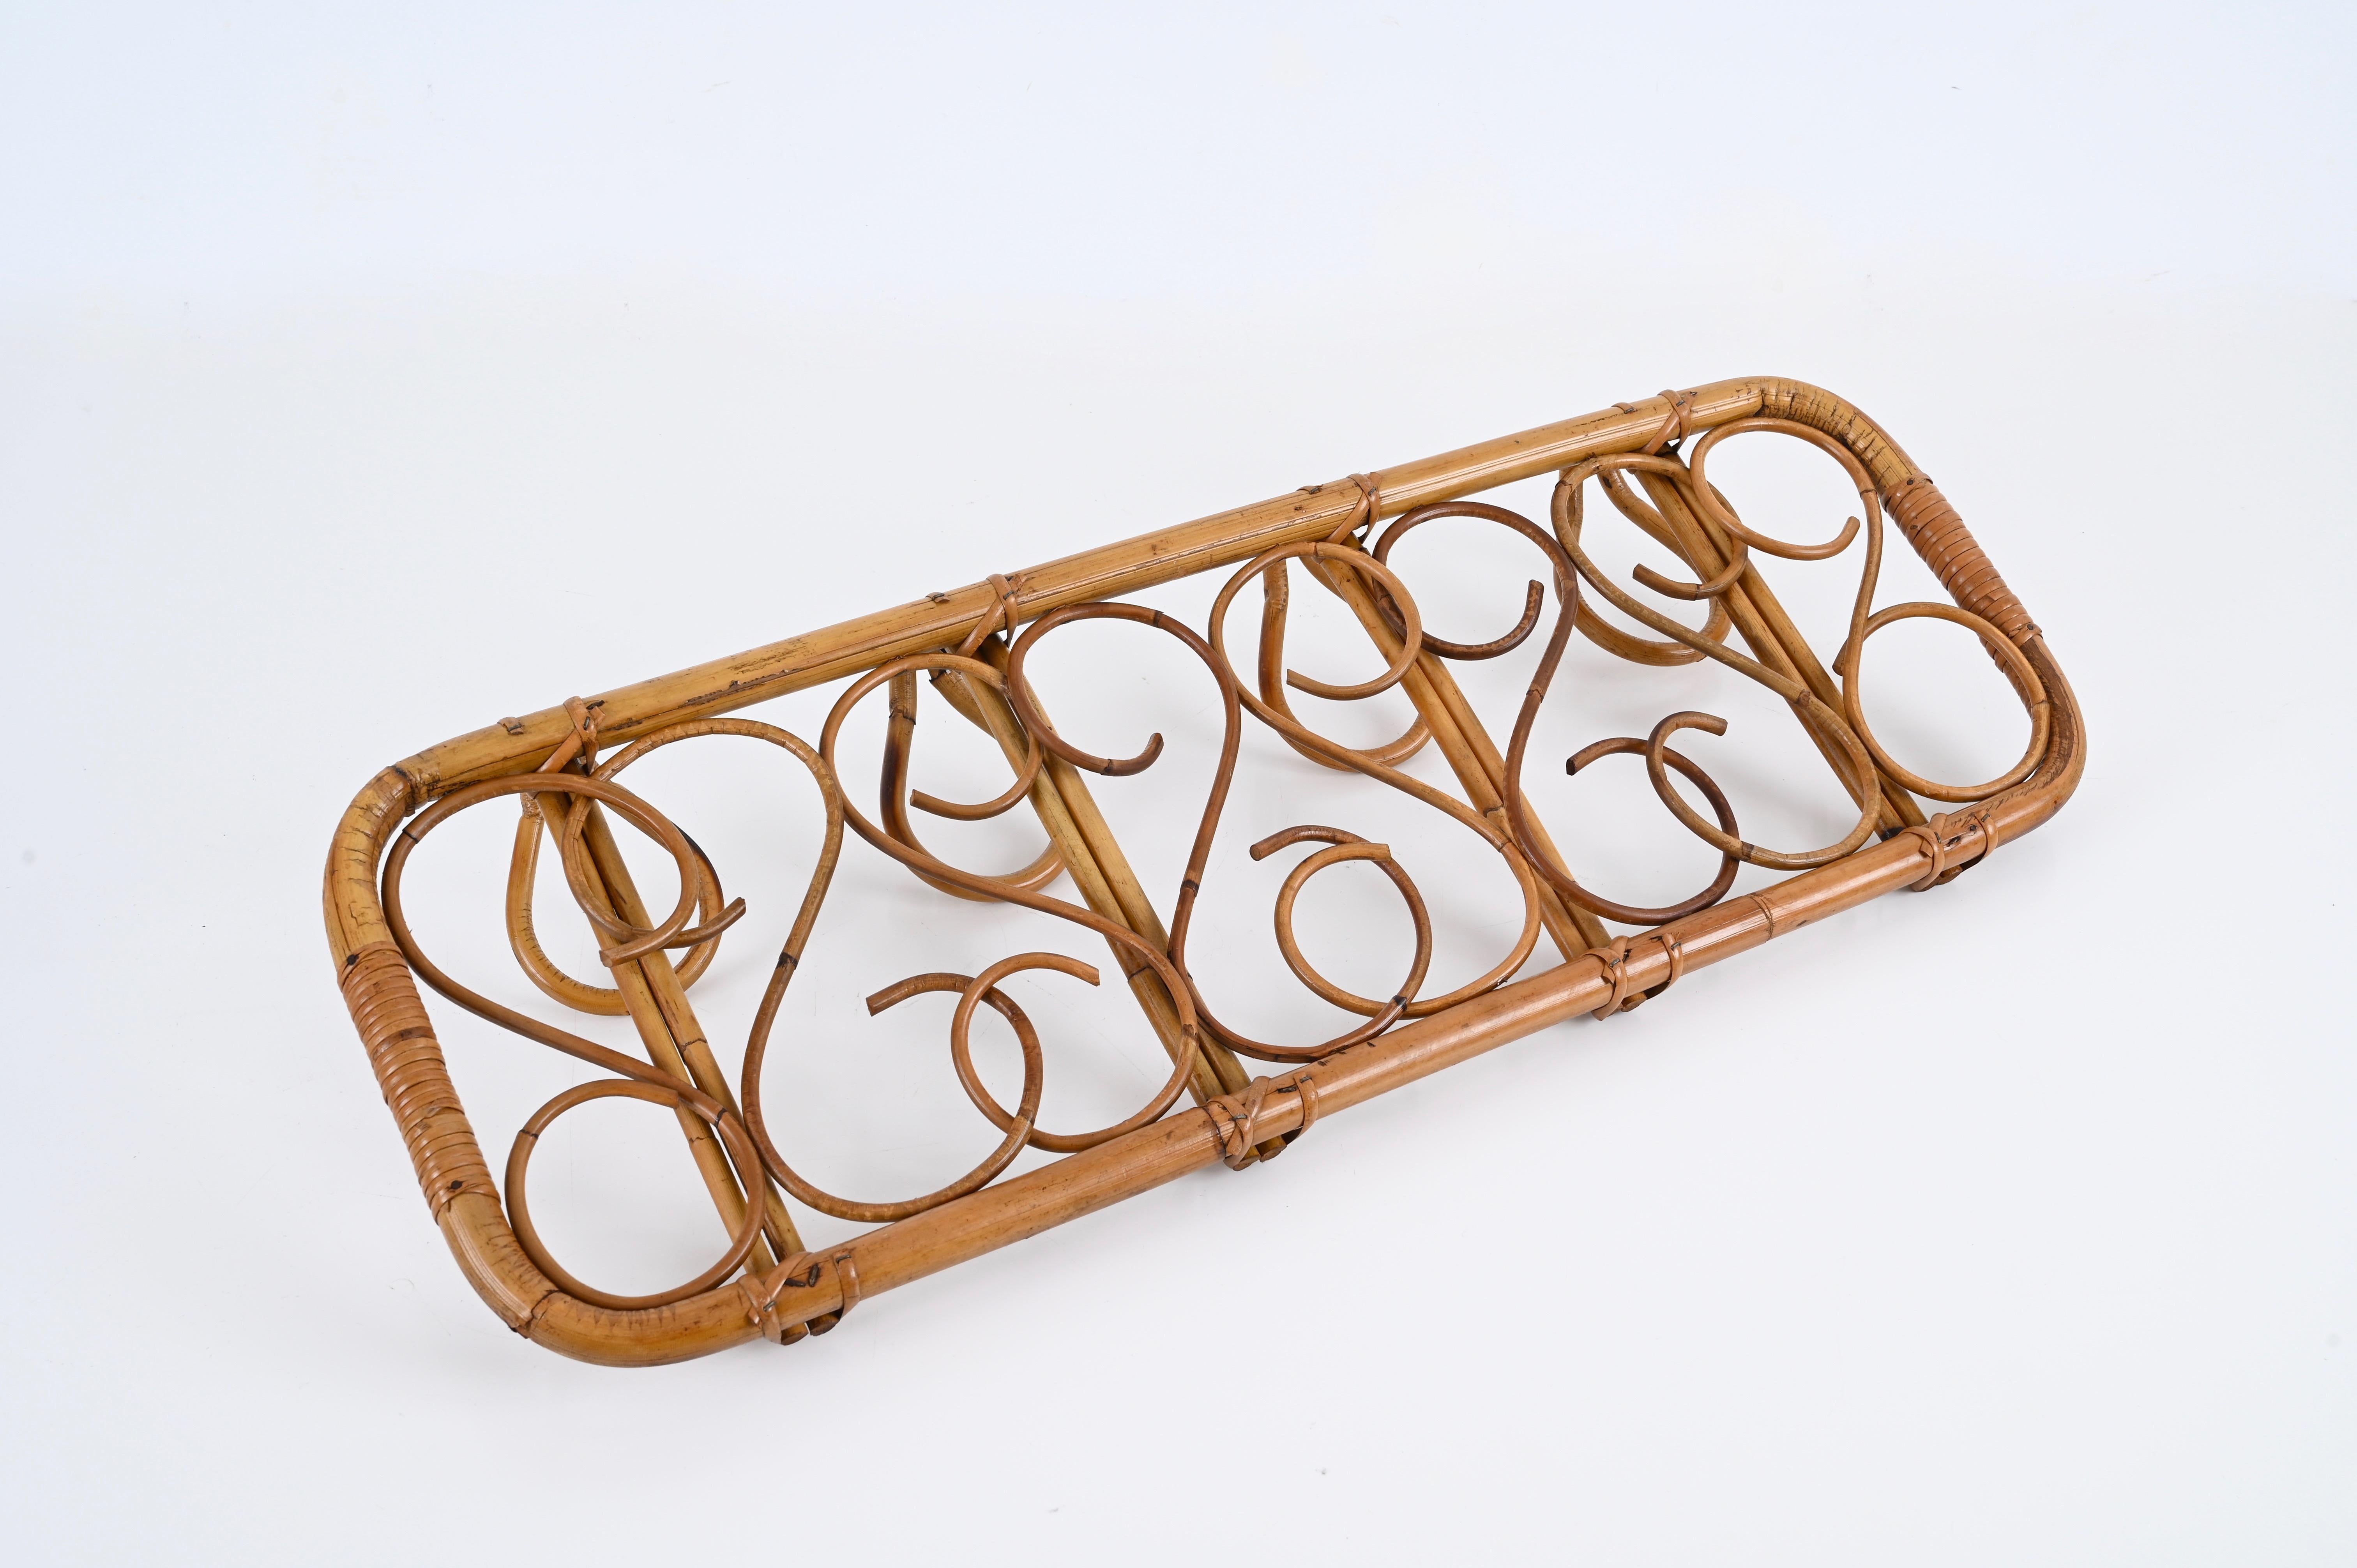 Midcentury French Riviera Rattan, Wicker, Curved Bamboo Coat Rack, Italy 1960s For Sale 1